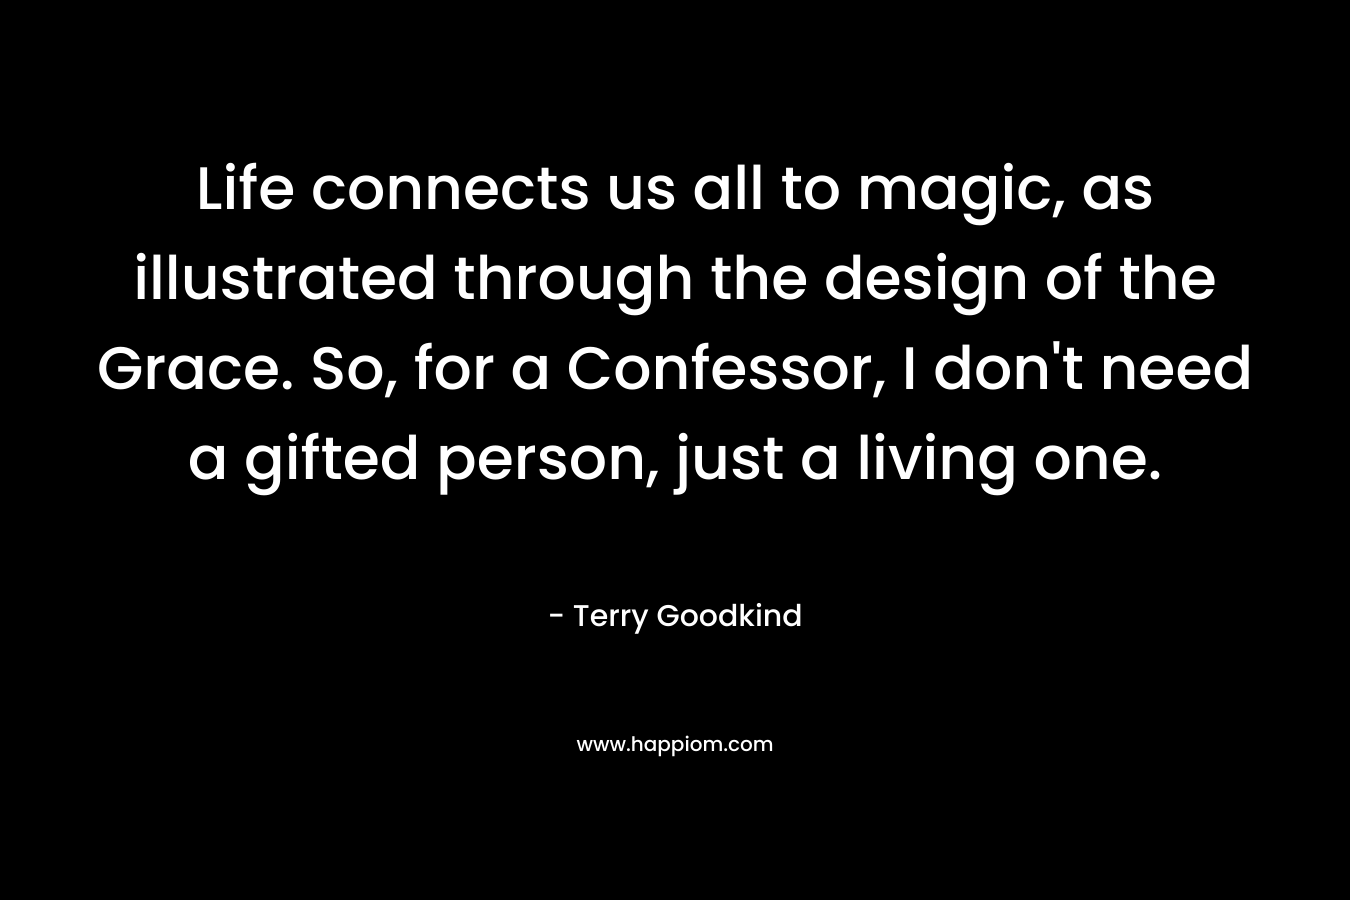 Life connects us all to magic, as illustrated through the design of the Grace. So, for a Confessor, I don’t need a gifted person, just a living one. – Terry Goodkind